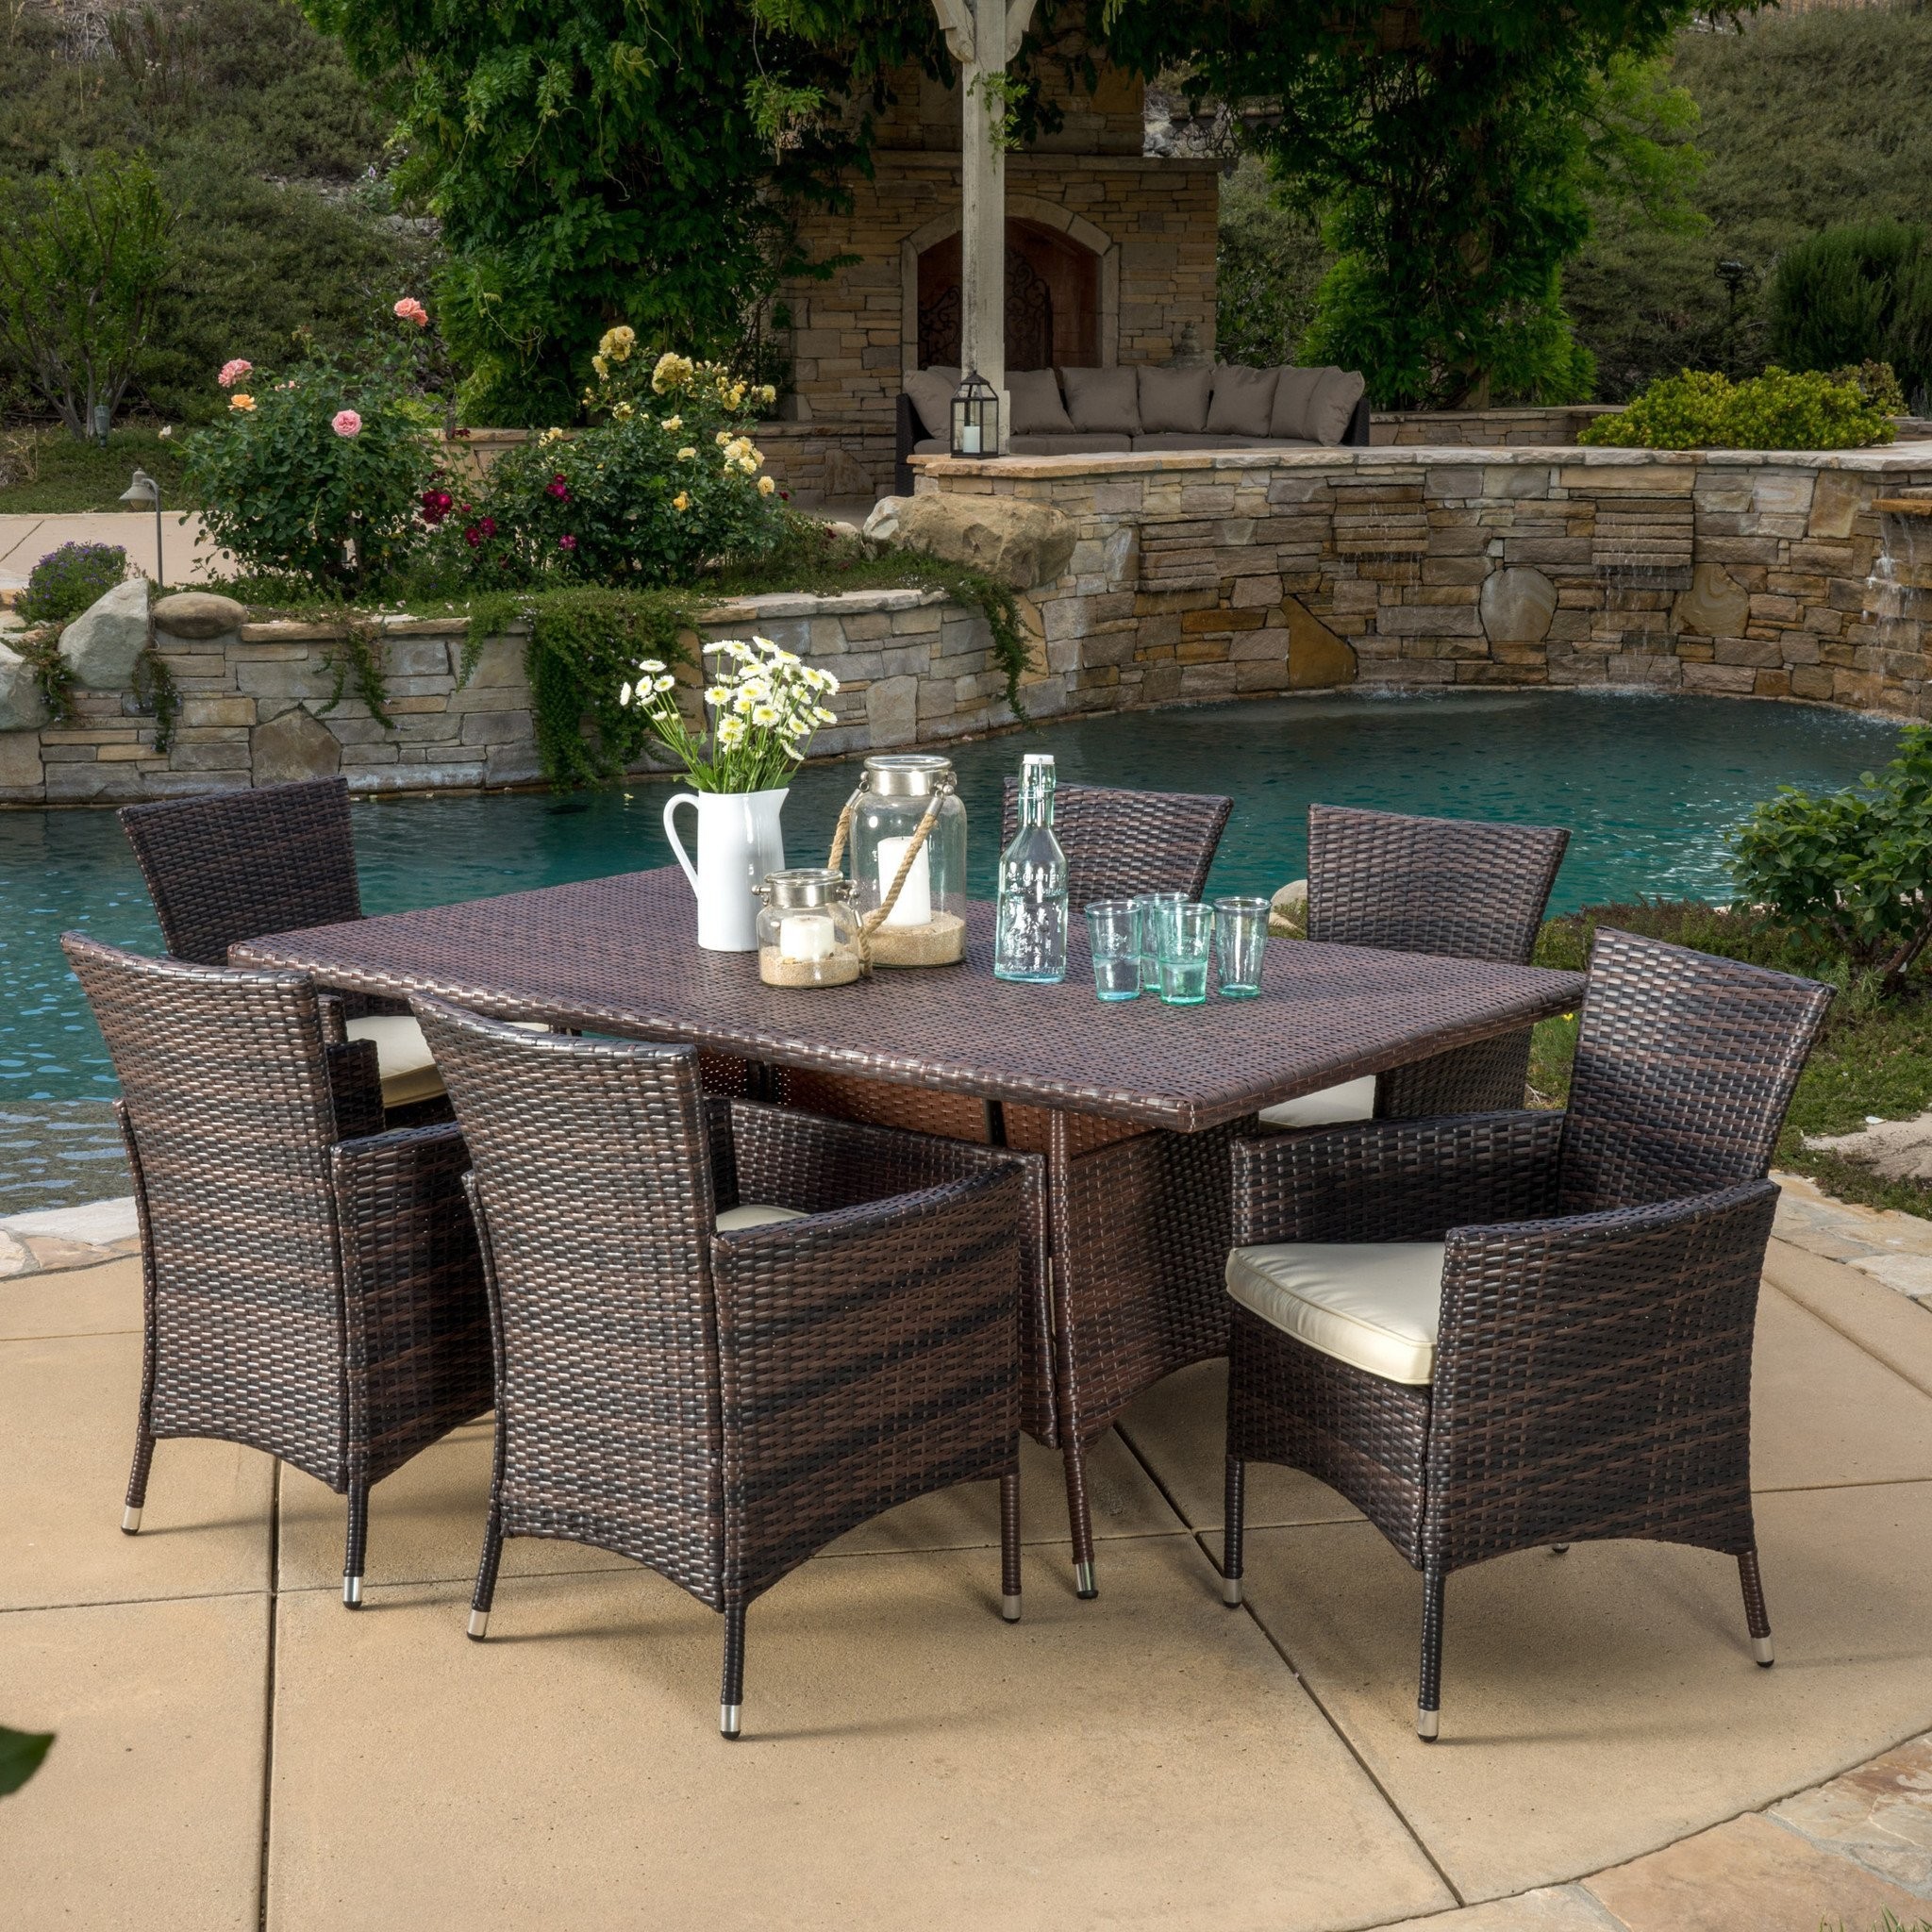 Clementine Outdoor 7pc Multibrown Wicker Dining Se...